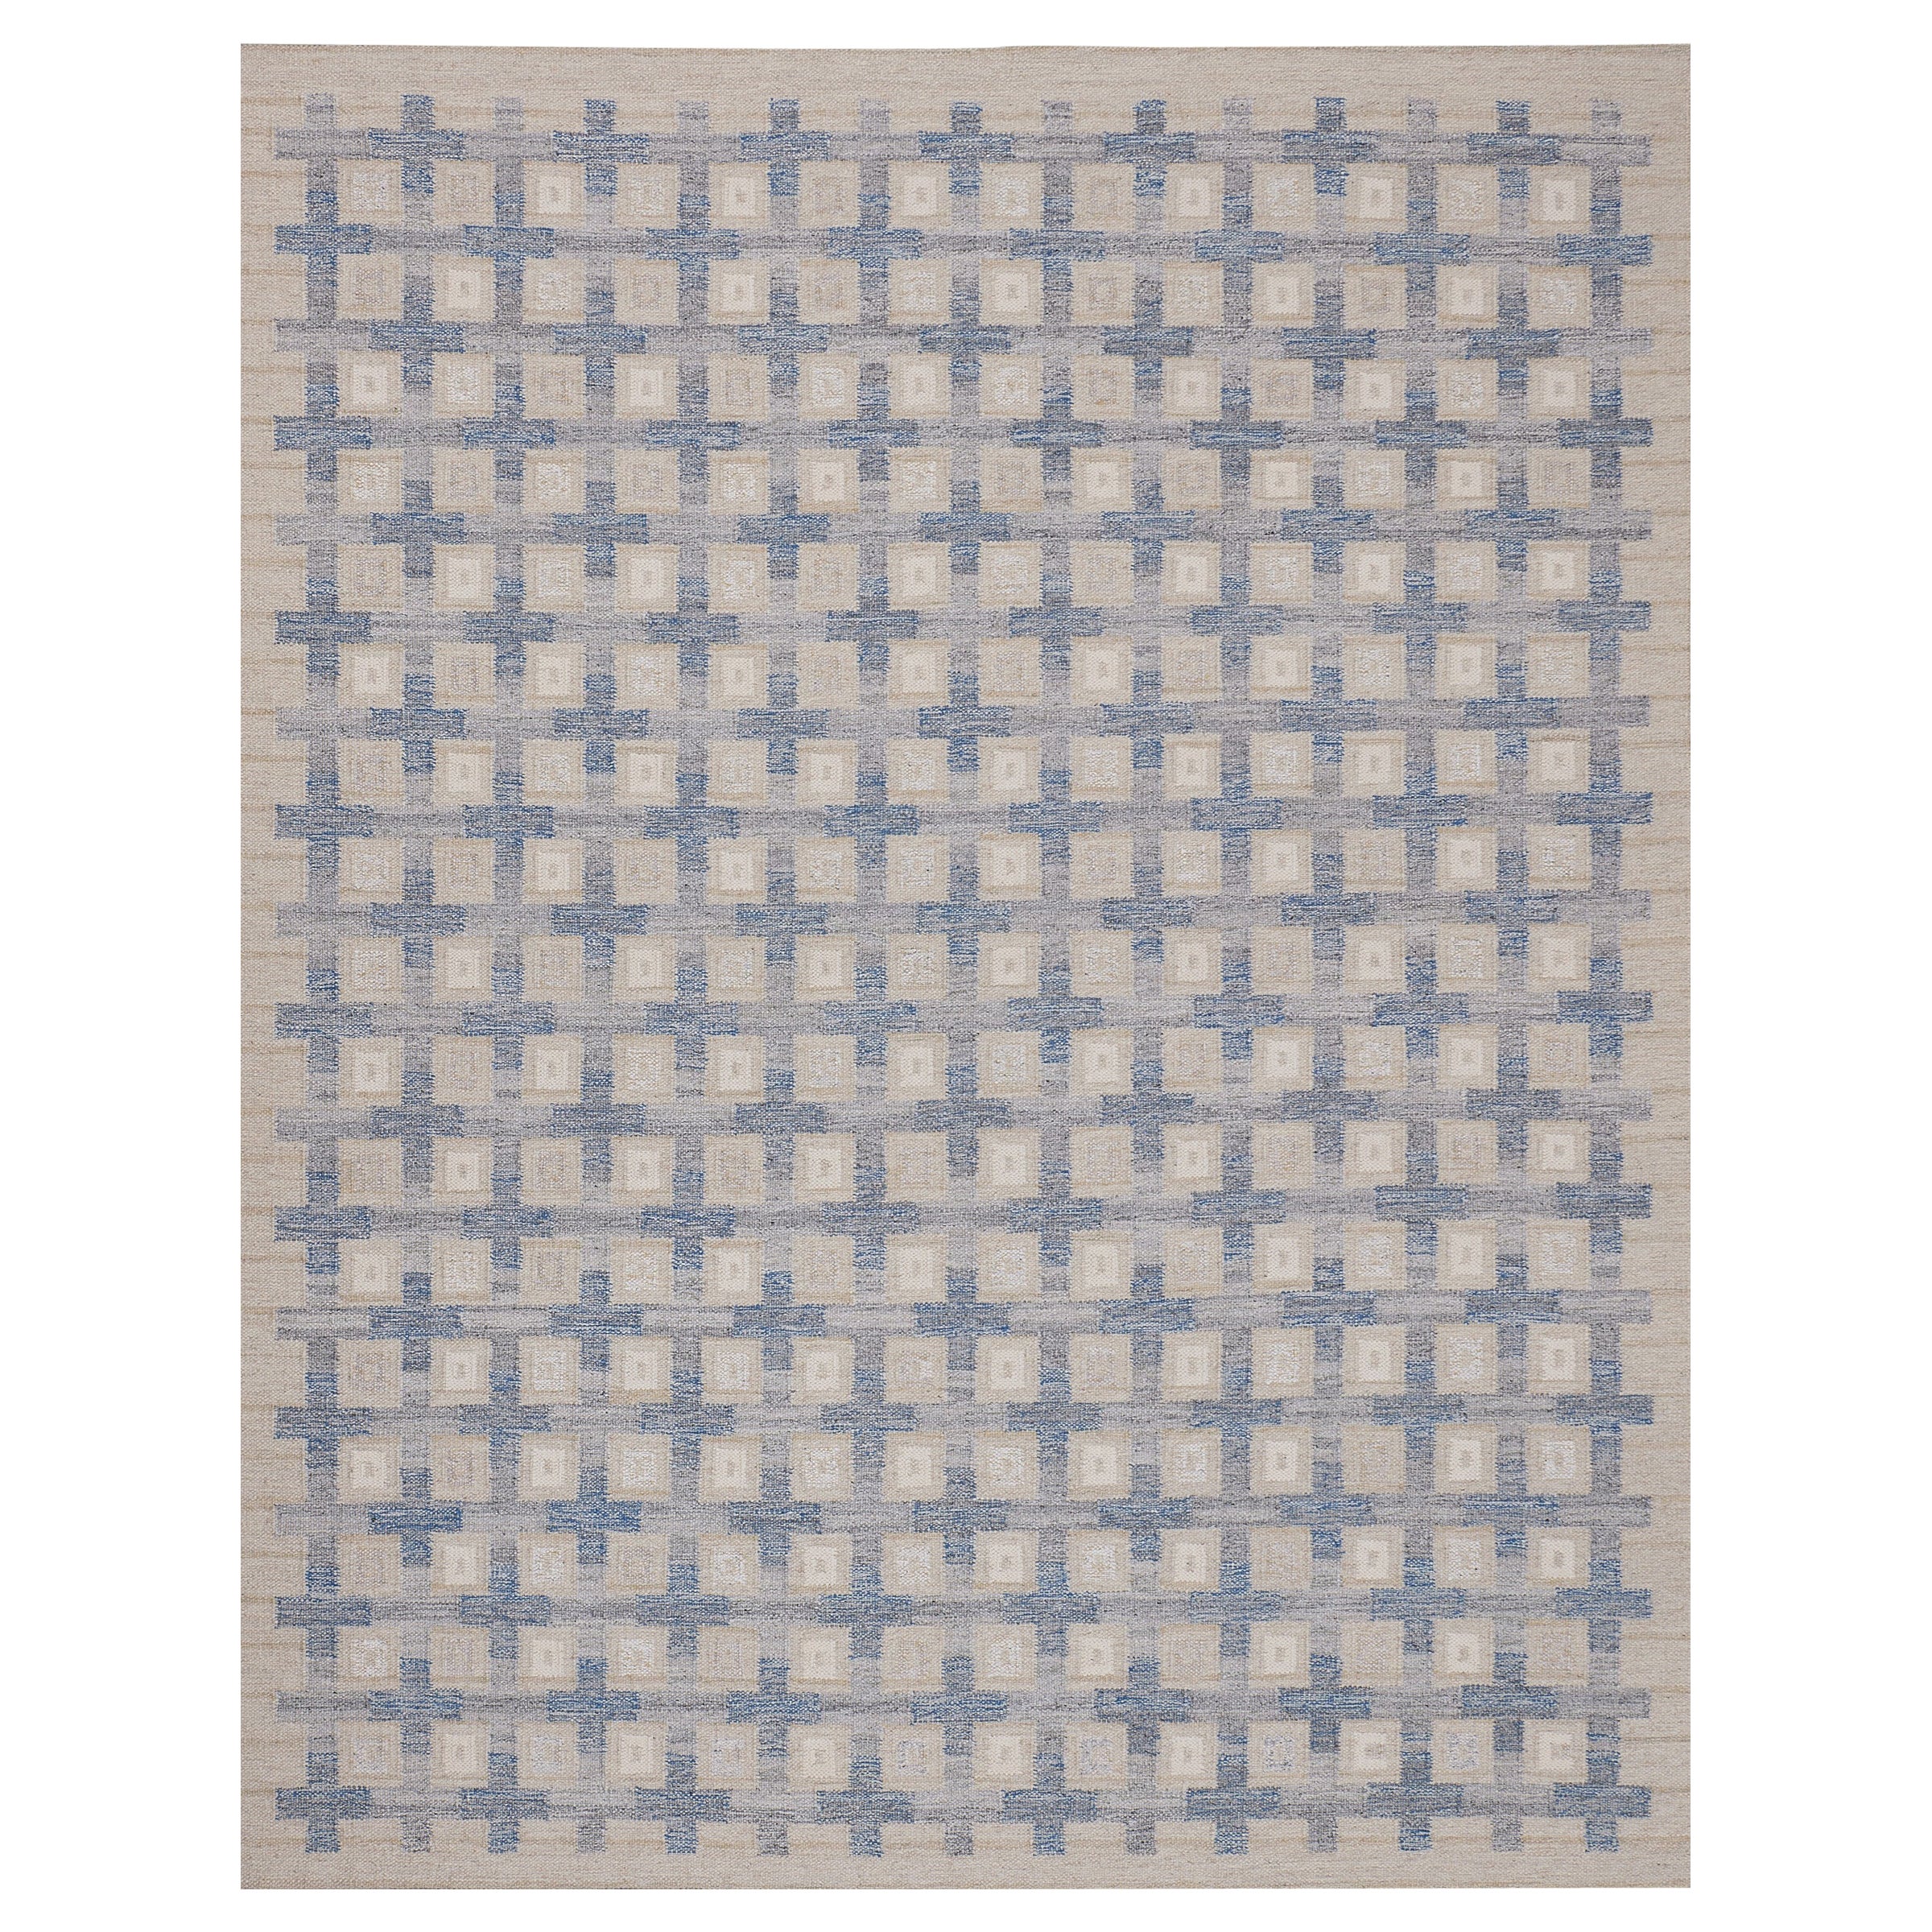 Contemporary Hand-woven 100% Wool Swedish-Inspired Blue Rug